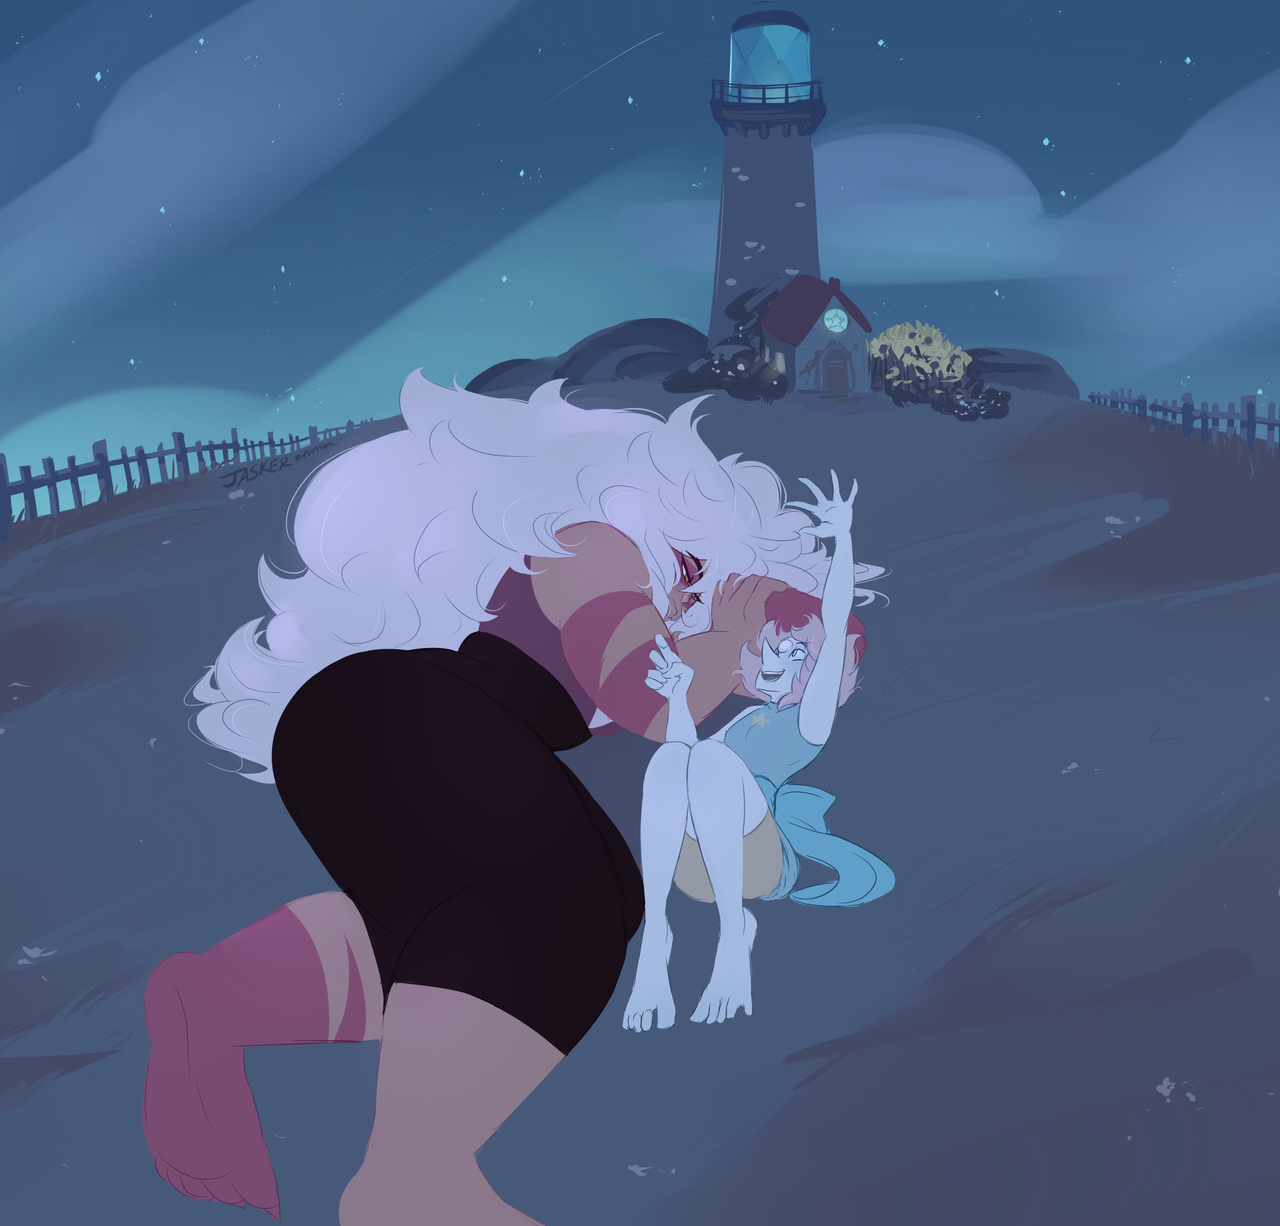 shes got those looove lovey eyes ♡♡♡ pearl is excitedly telling her about star systems and distant galaxies she’s visited that she can see from here and jasper is just 😍💕💗💖